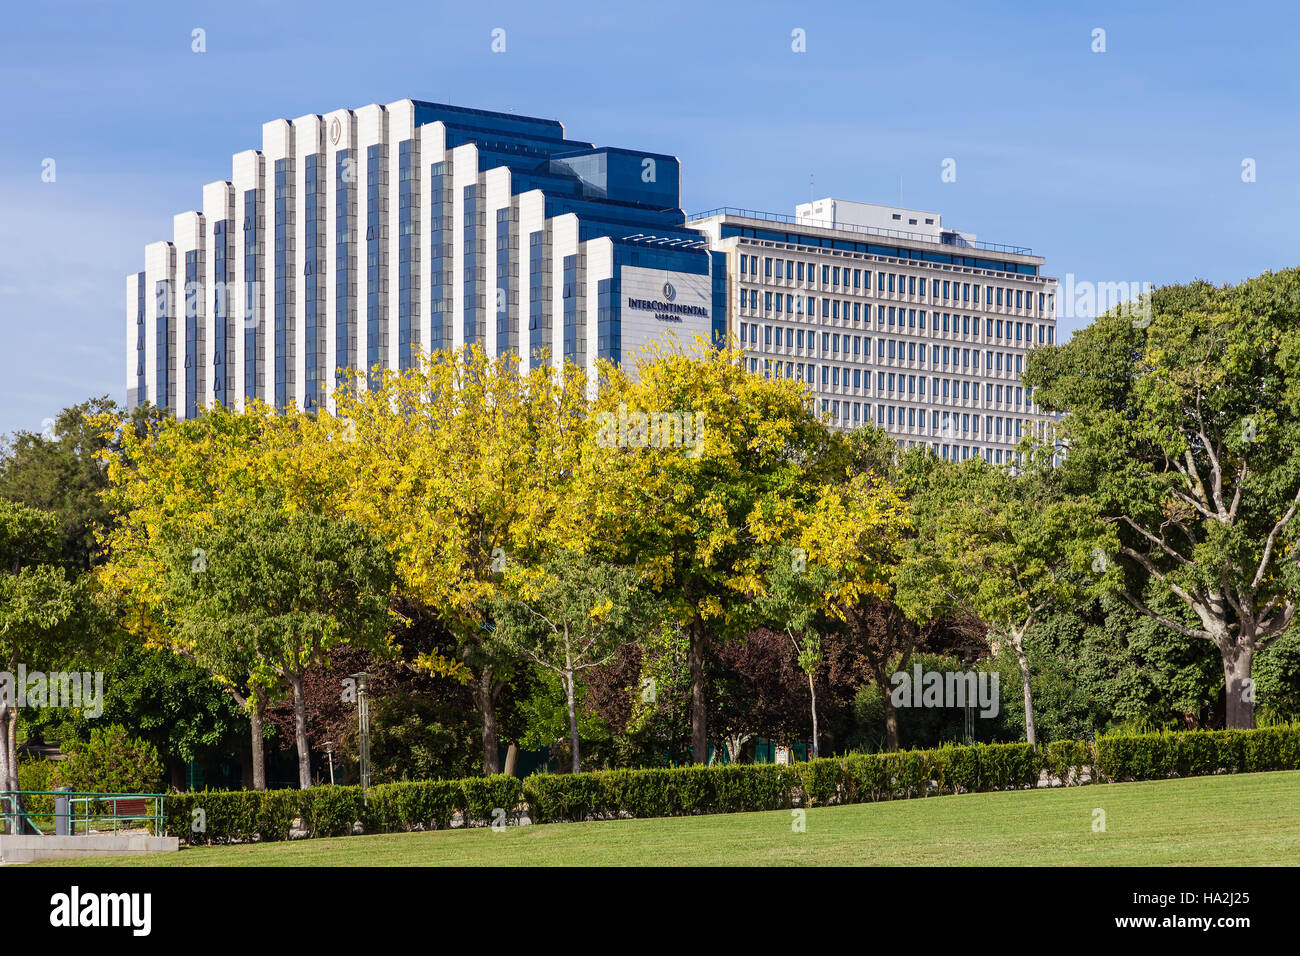 Lisbon, Portugal - October 19, 2016: The Lisbon Intercontinental Hotel. A five star hotel located next to the famous Eduardo VII Park. Stock Photo